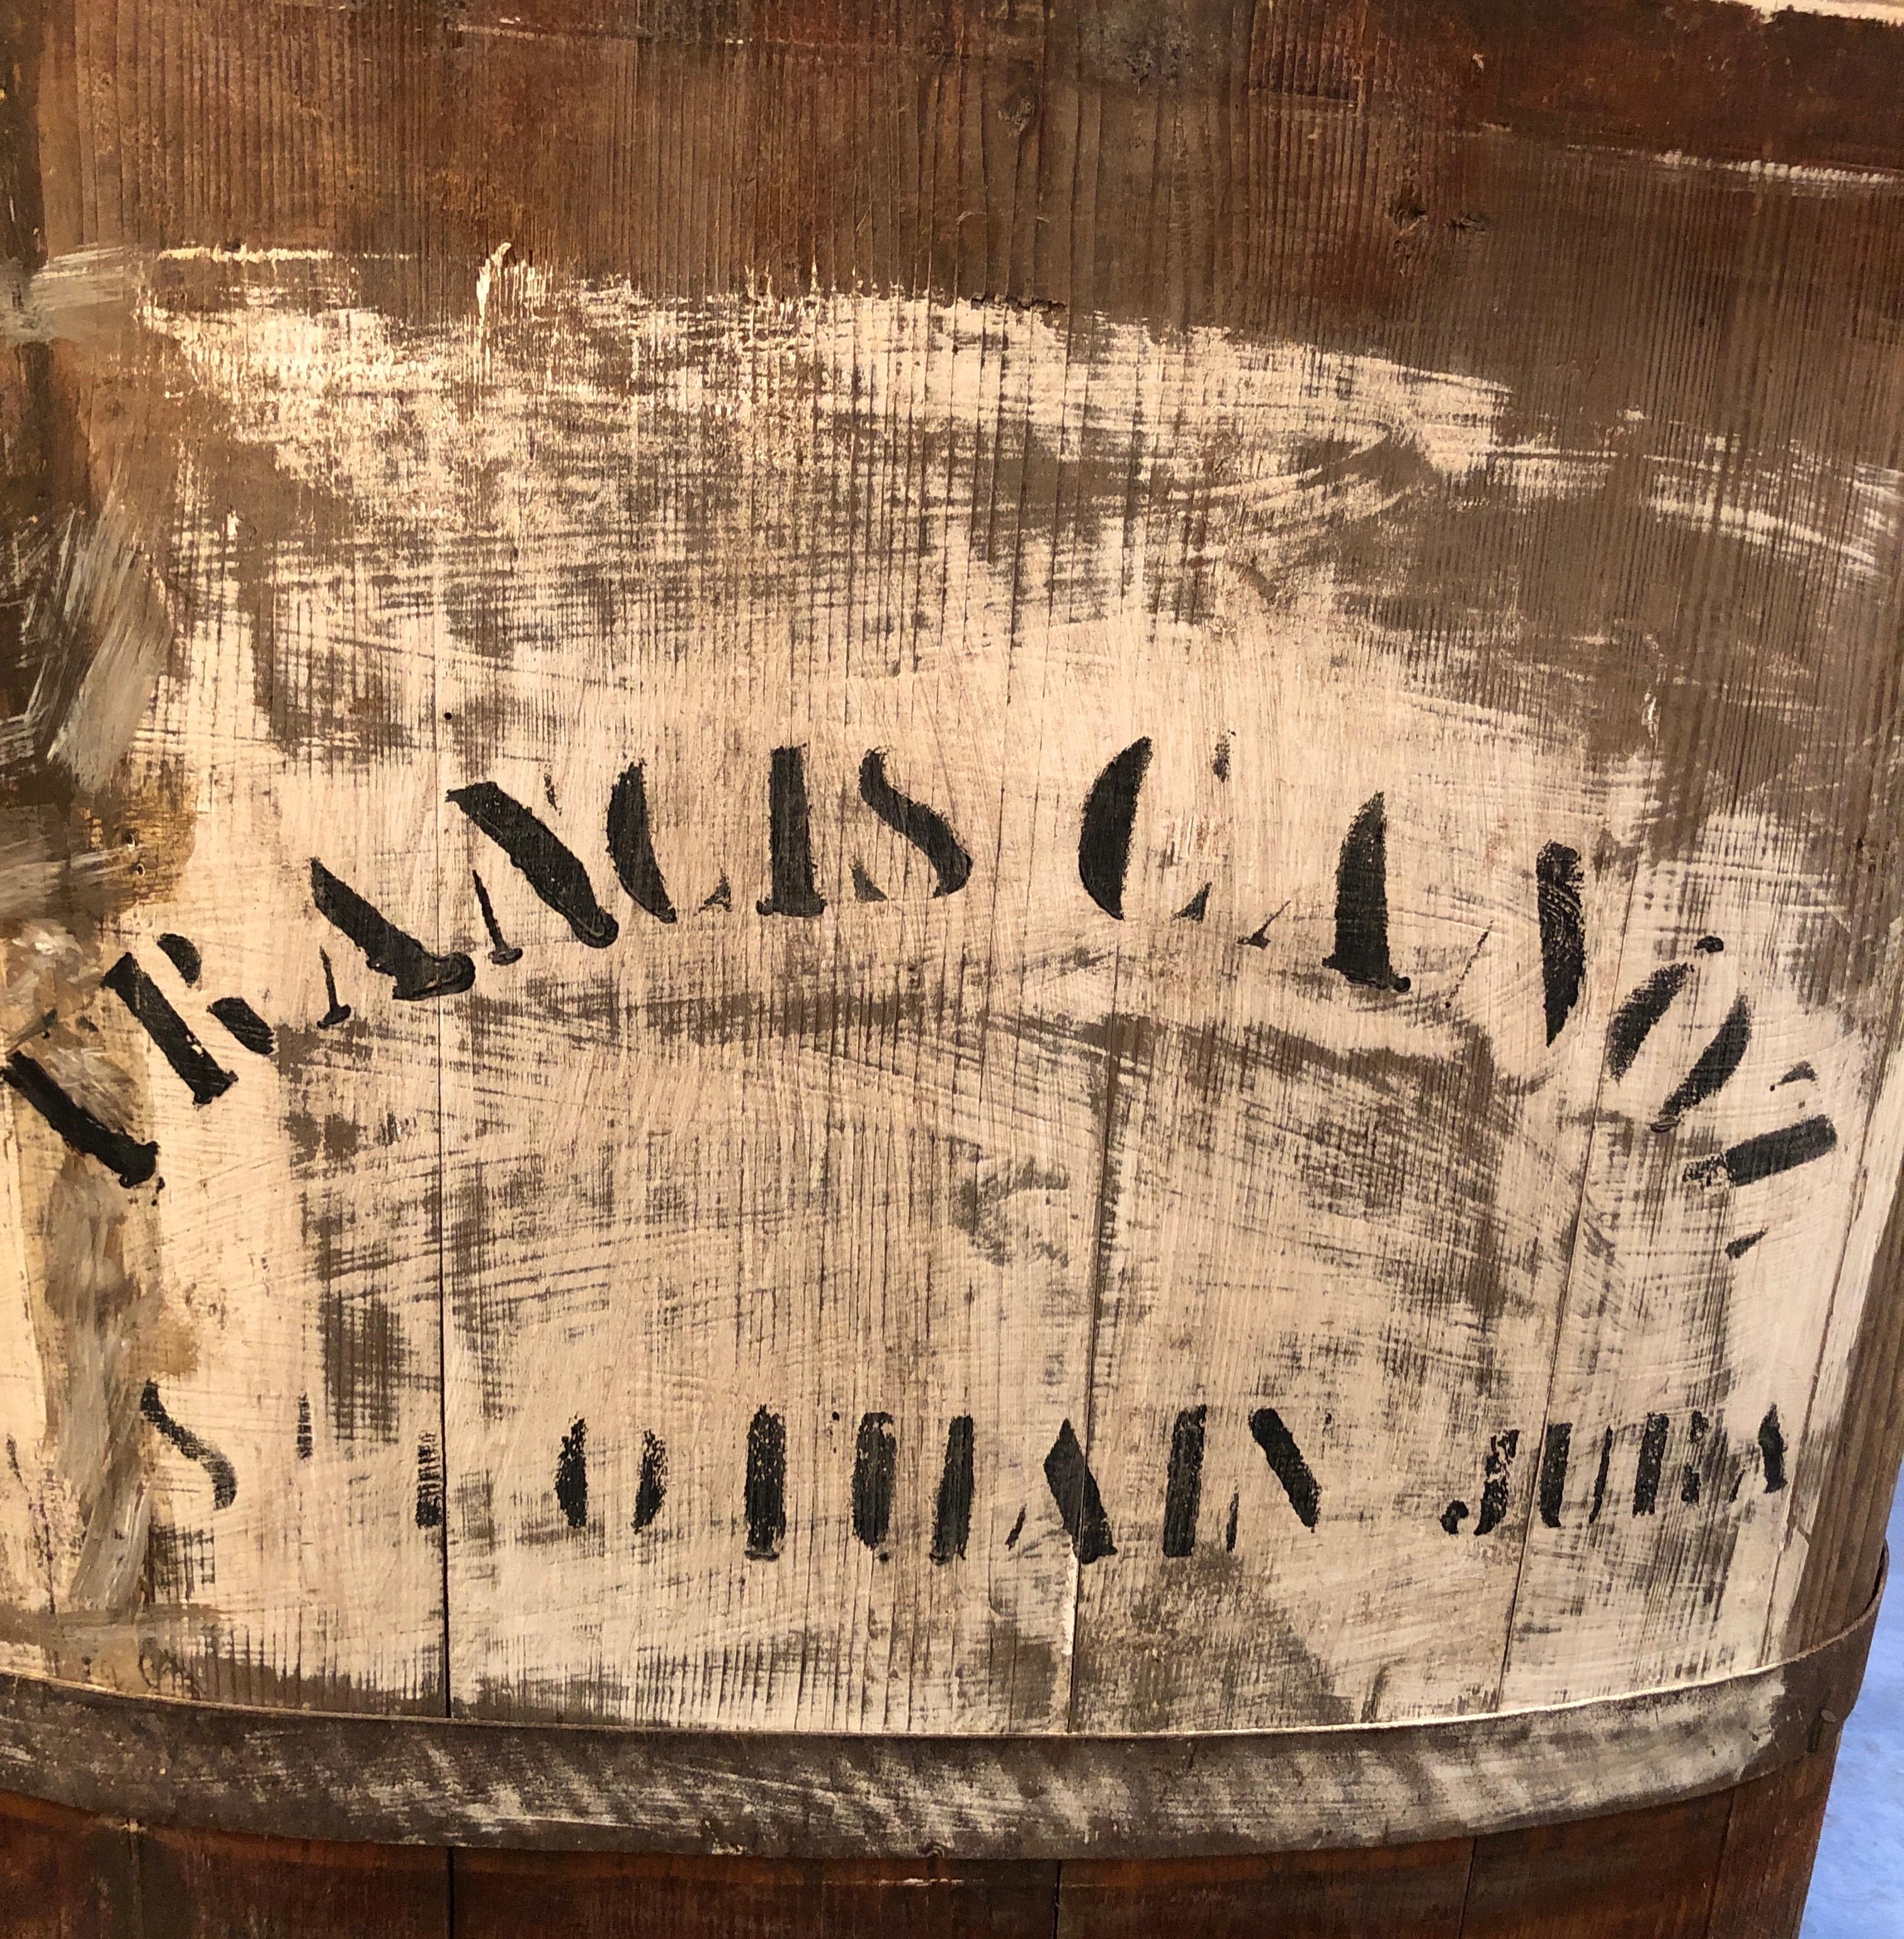 A large stenciled and coopered wine vineyard bin used by a grower in the late 19th Century to collect wine grapes in the Burgundy region of France. The striking shape and patina features old white and black painted stencils on two sides of the bin